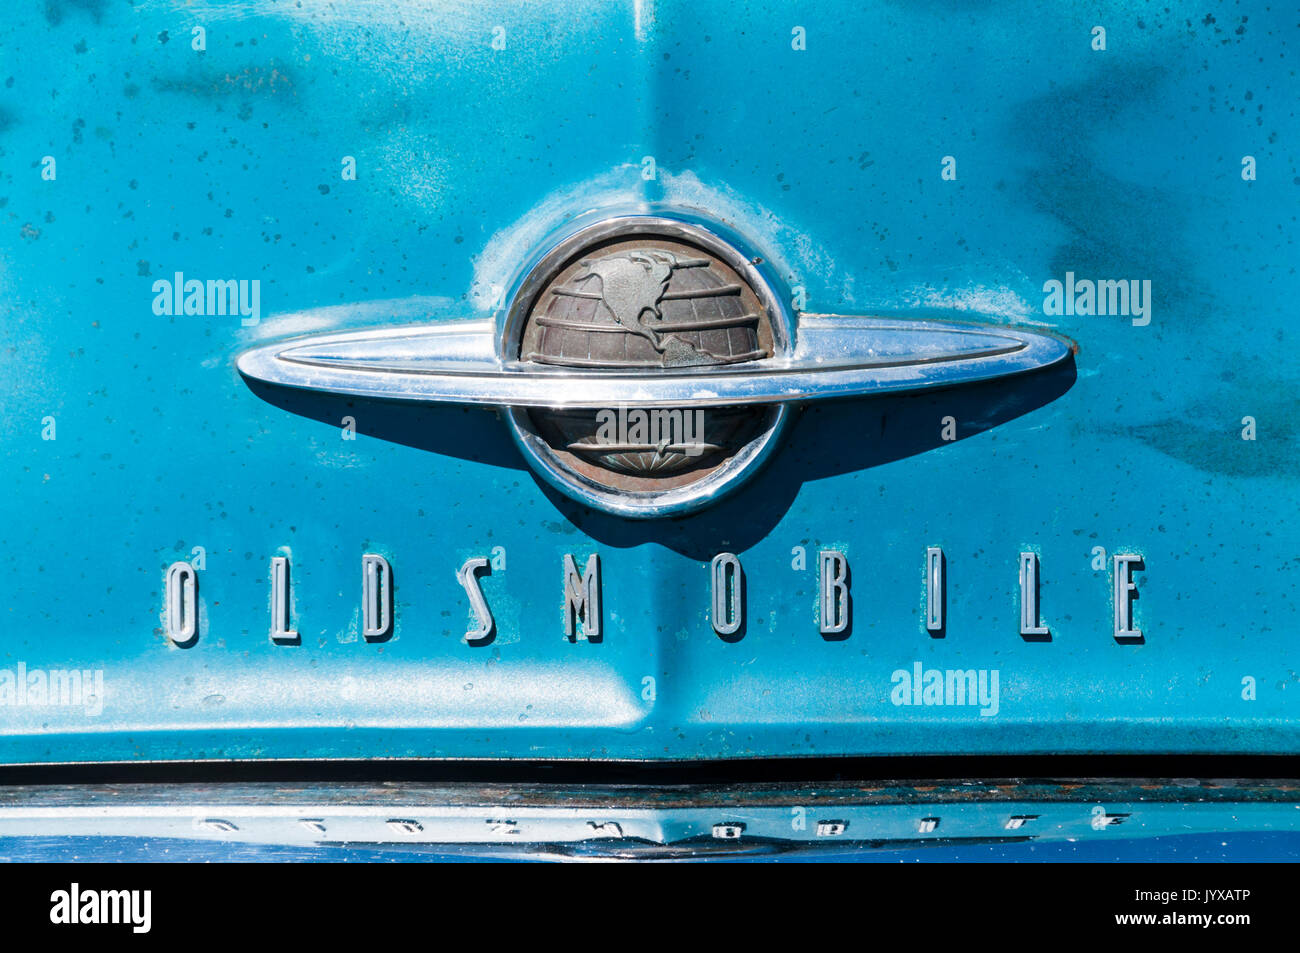 Name on the front of an Oldsmobile 88 Futuramic car. Stock Photo